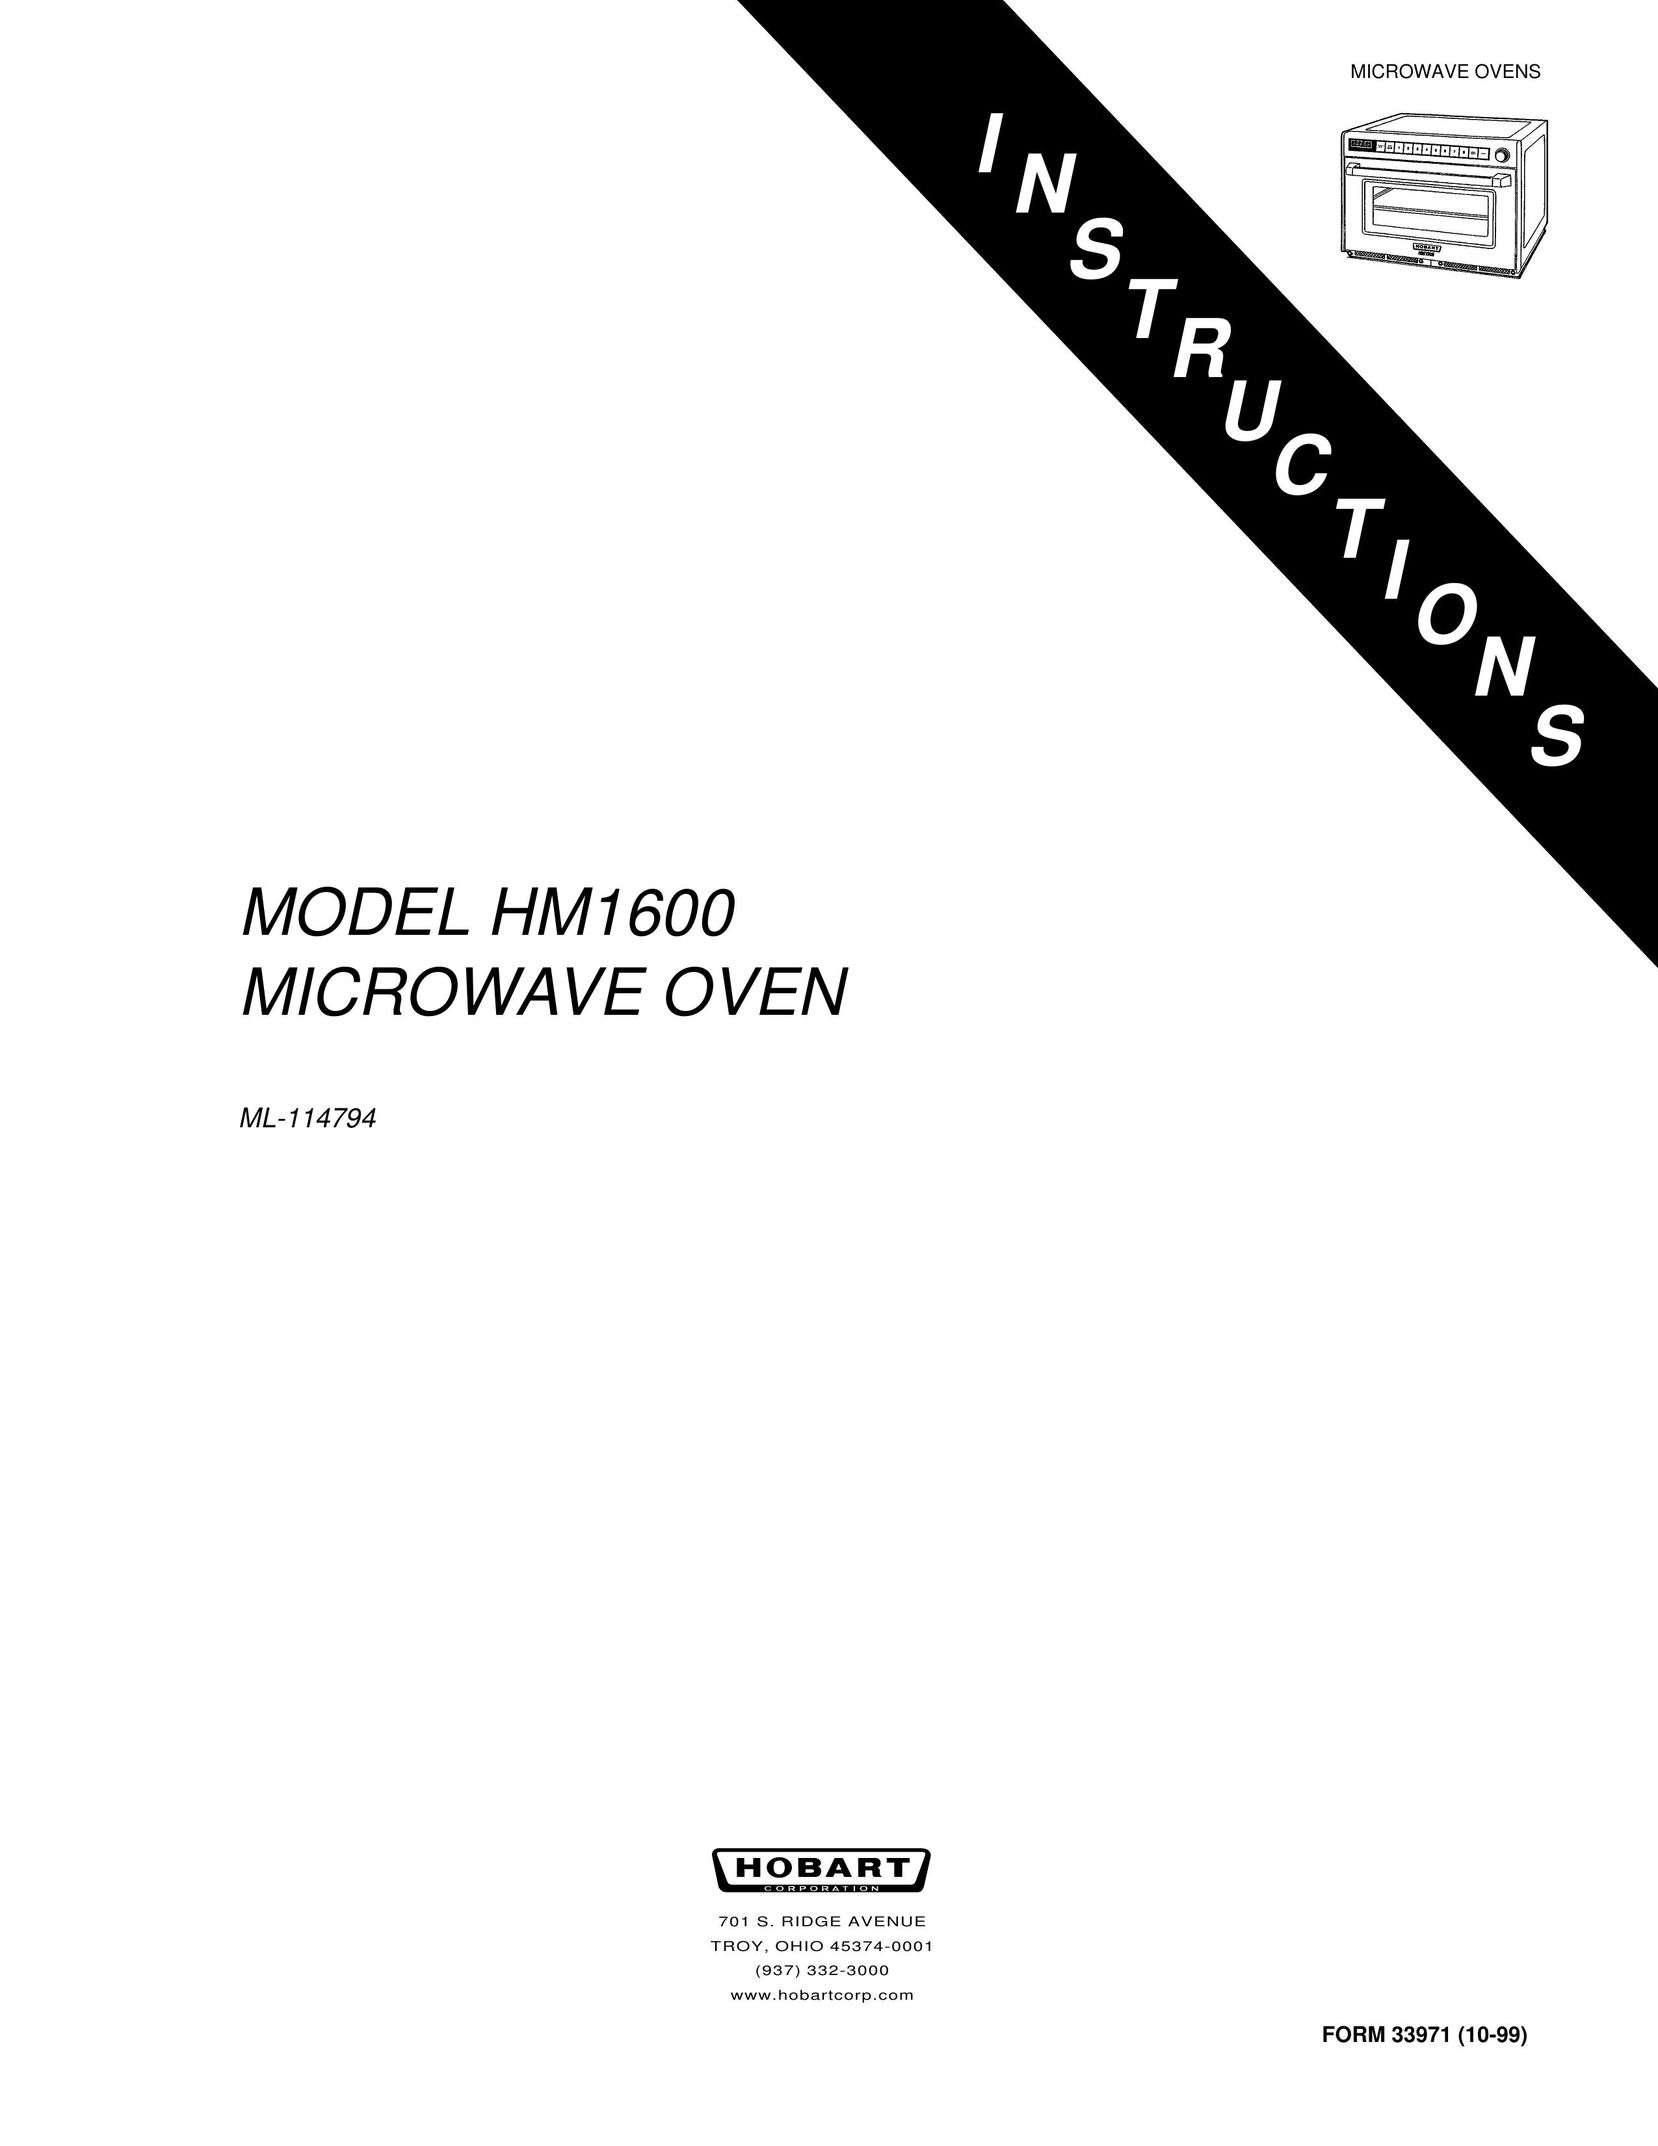 Hobart HM1600 Microwave Oven User Manual